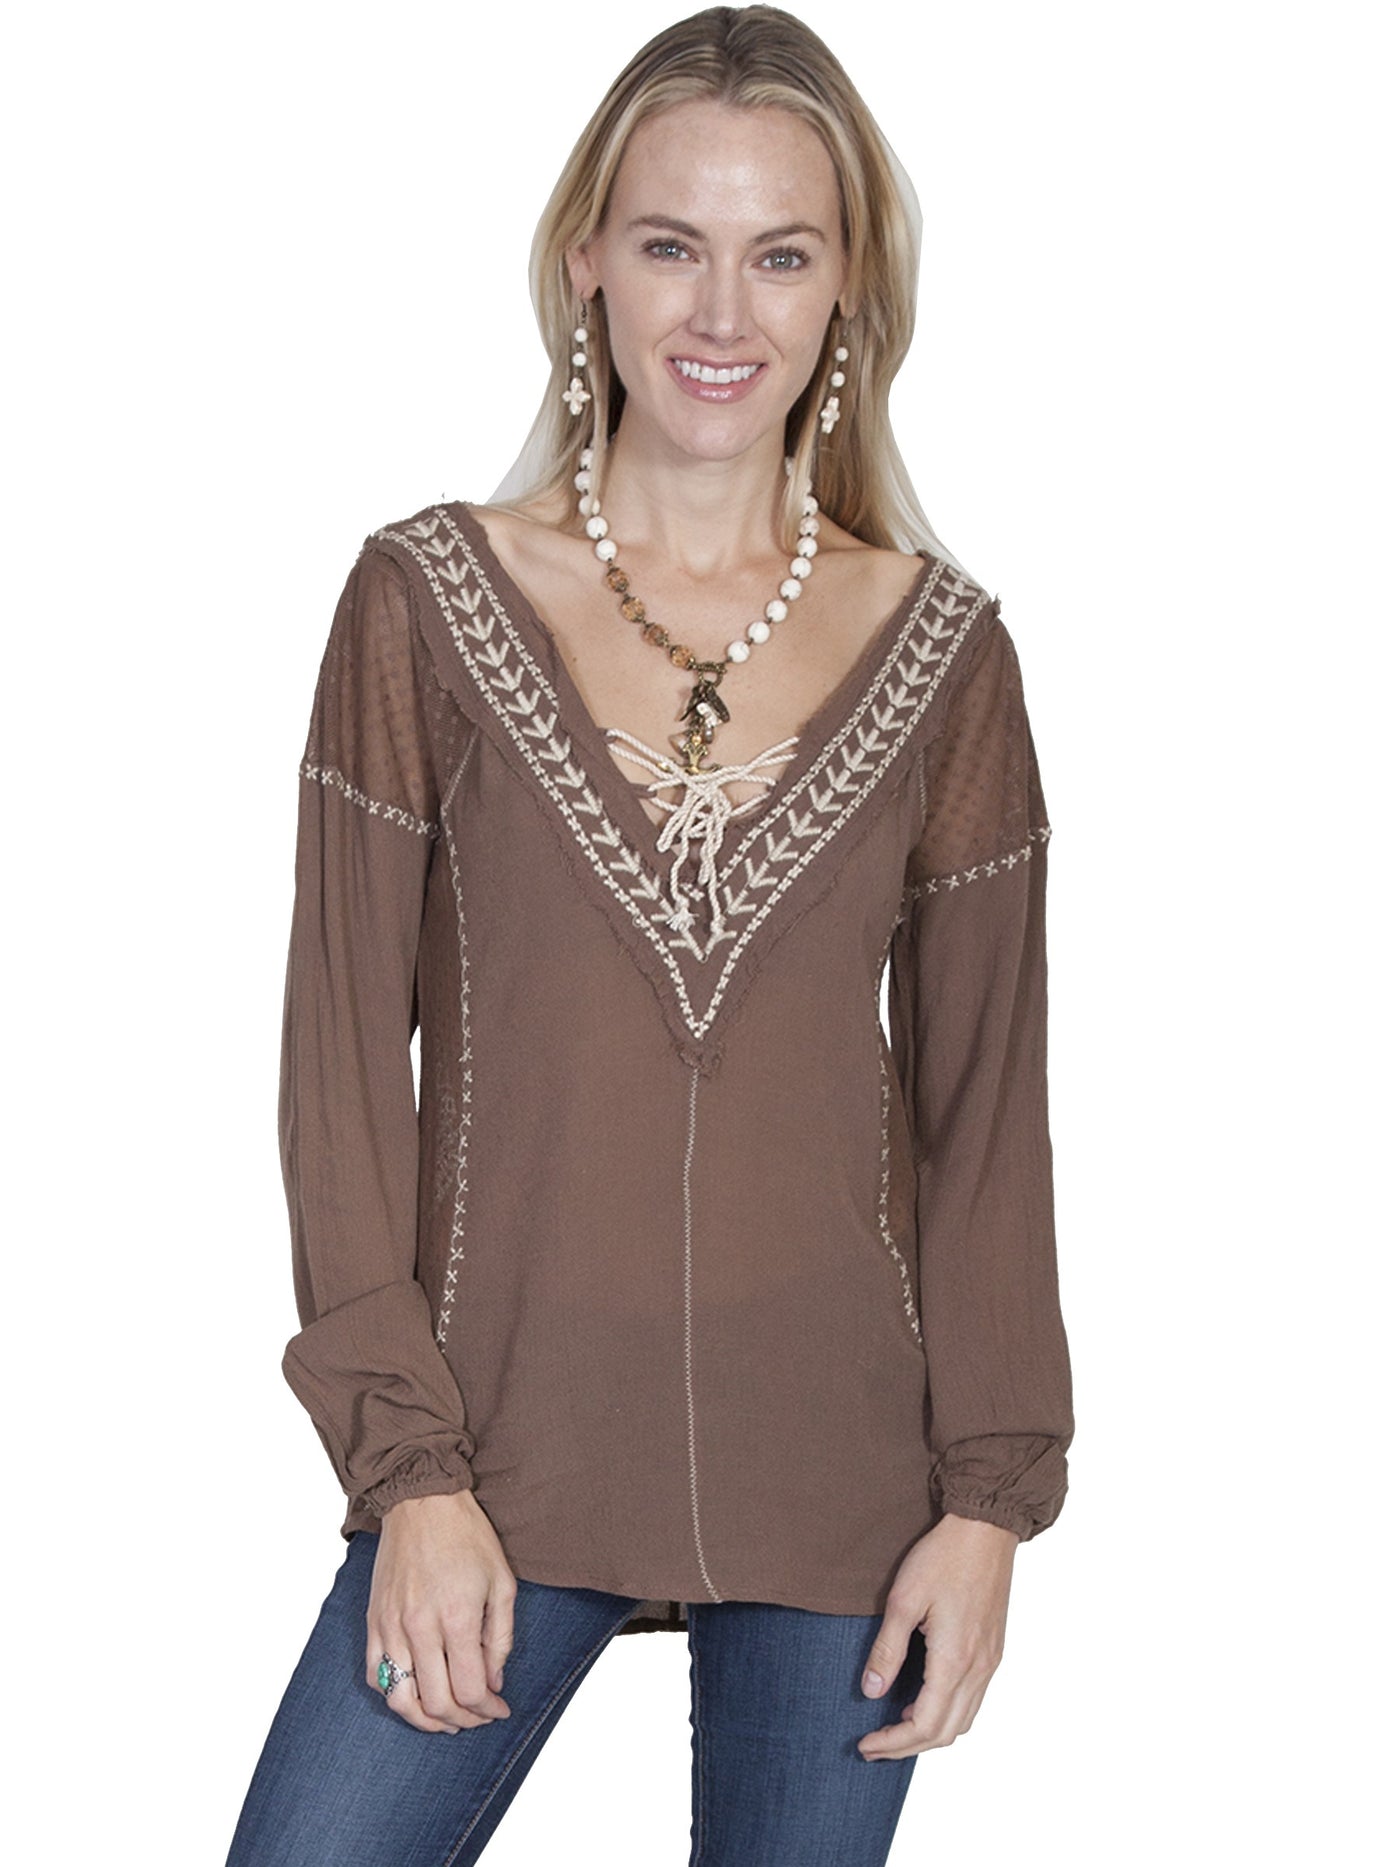 West Canyon Embroidered Blouse in Brown - SOLD OUT